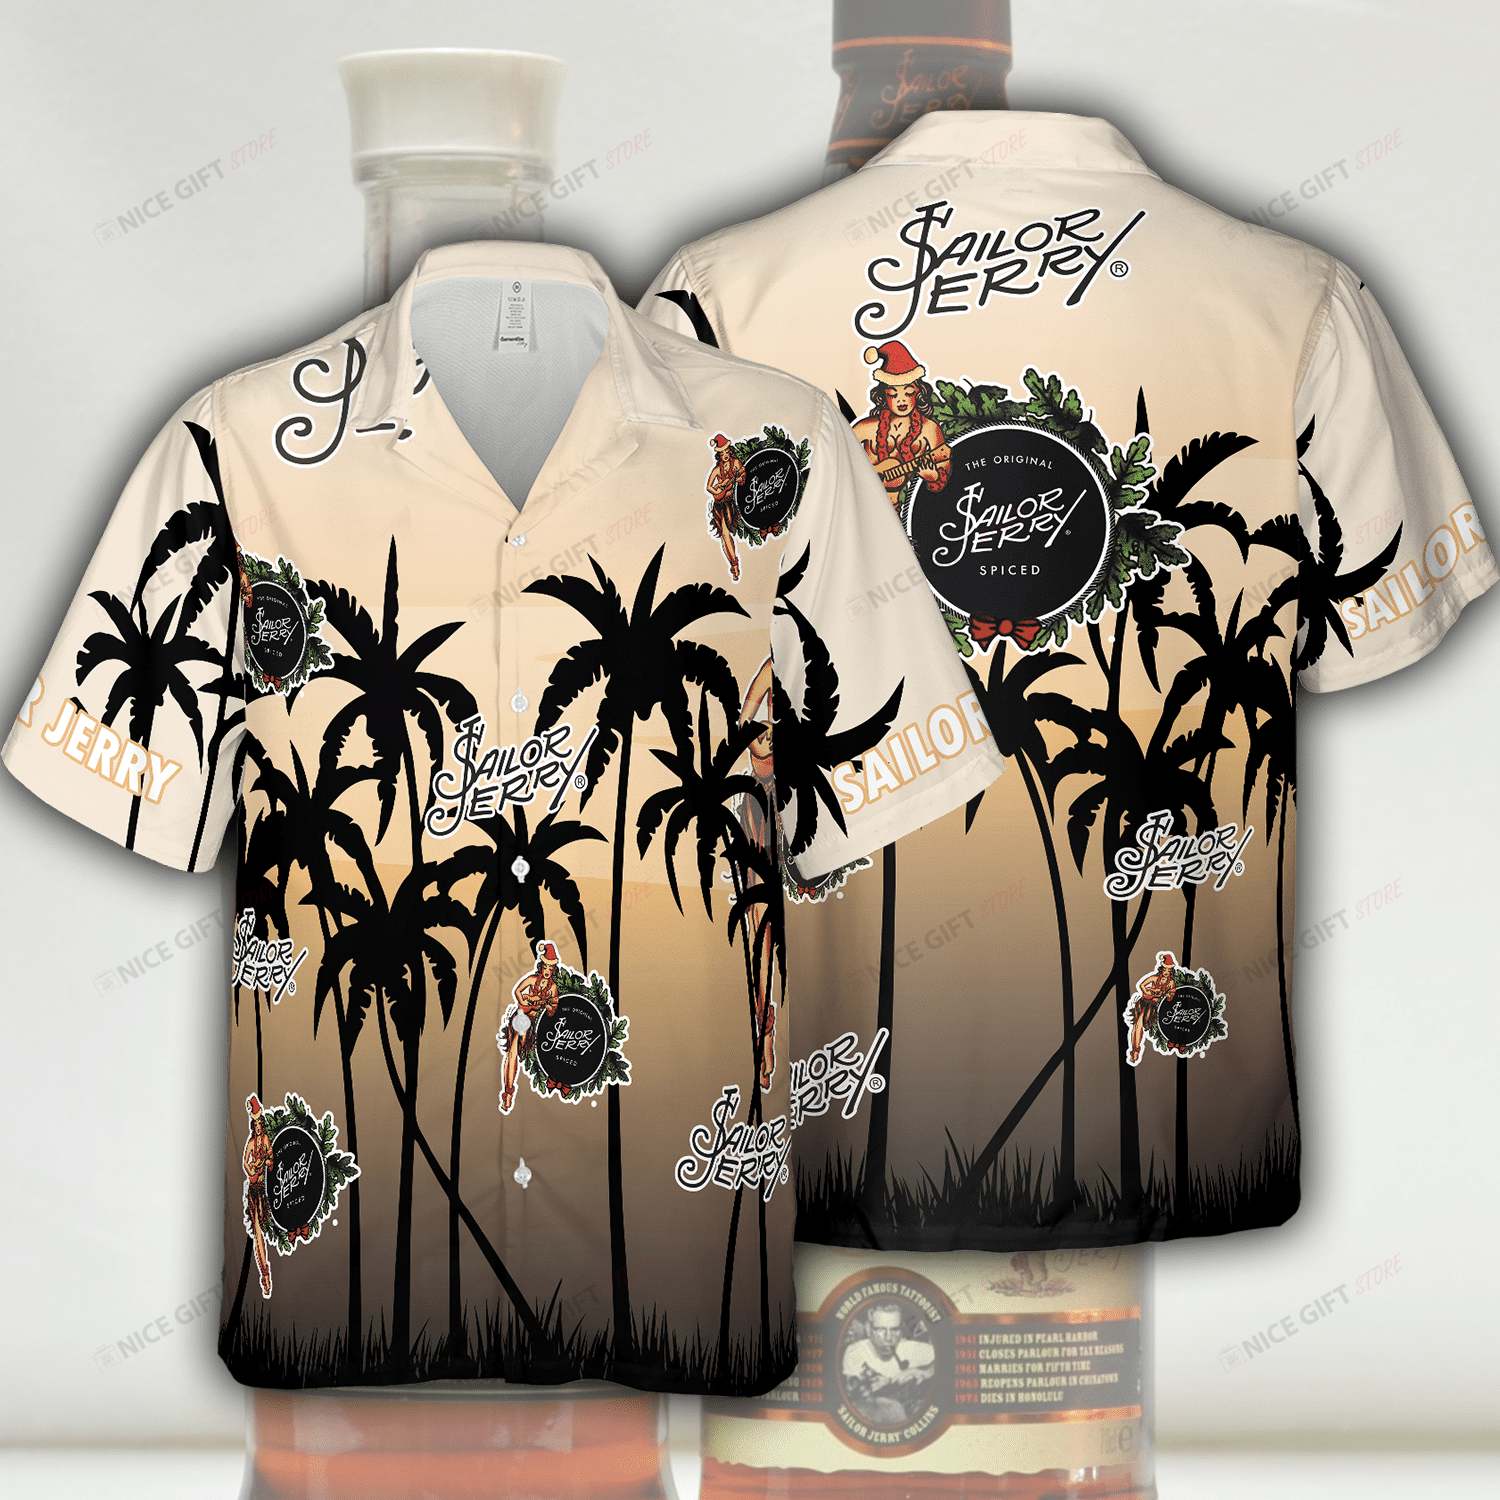 There are several types of Hawaiian shirts available on the market 145